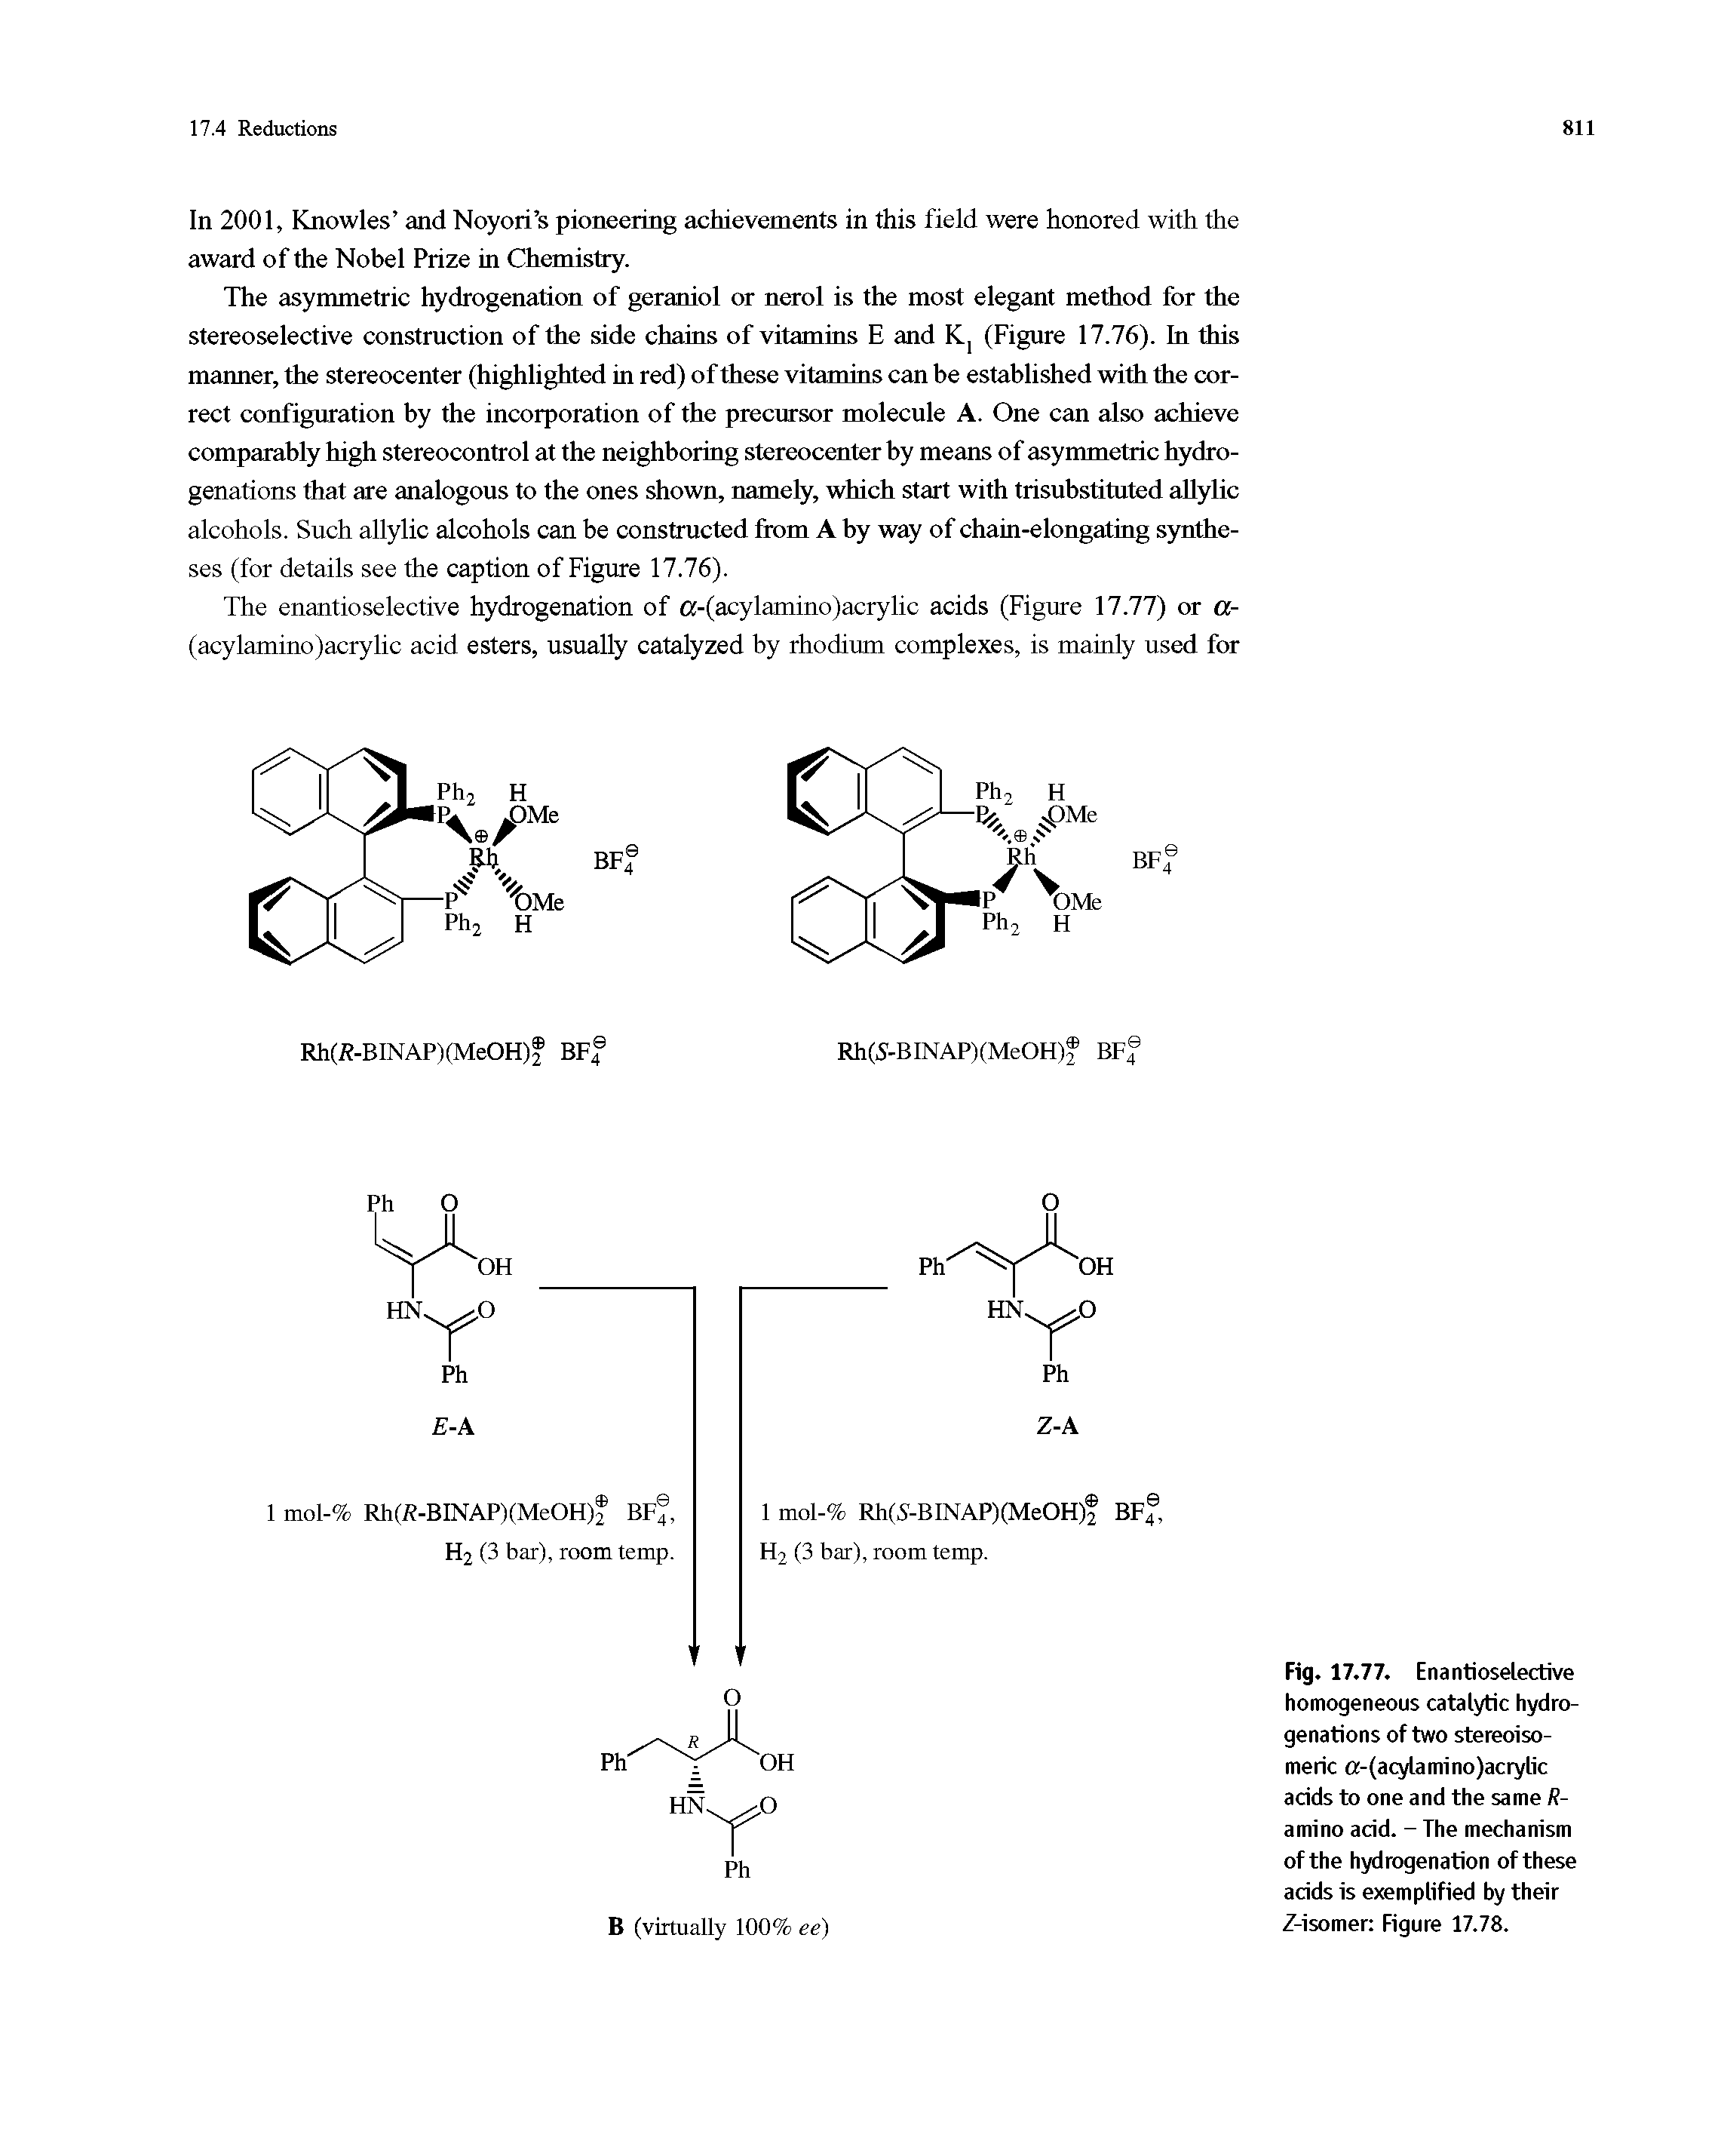 Fig. 17.77. Enantioselective homogeneous catalytic hydrogenations of two stereoiso-meric -(acylamino)acrylic acids to one and the same R-amino acid. - The mechanism of the hydrogenation of these acids is exemplified by their Z-isomer Figure 17.78.